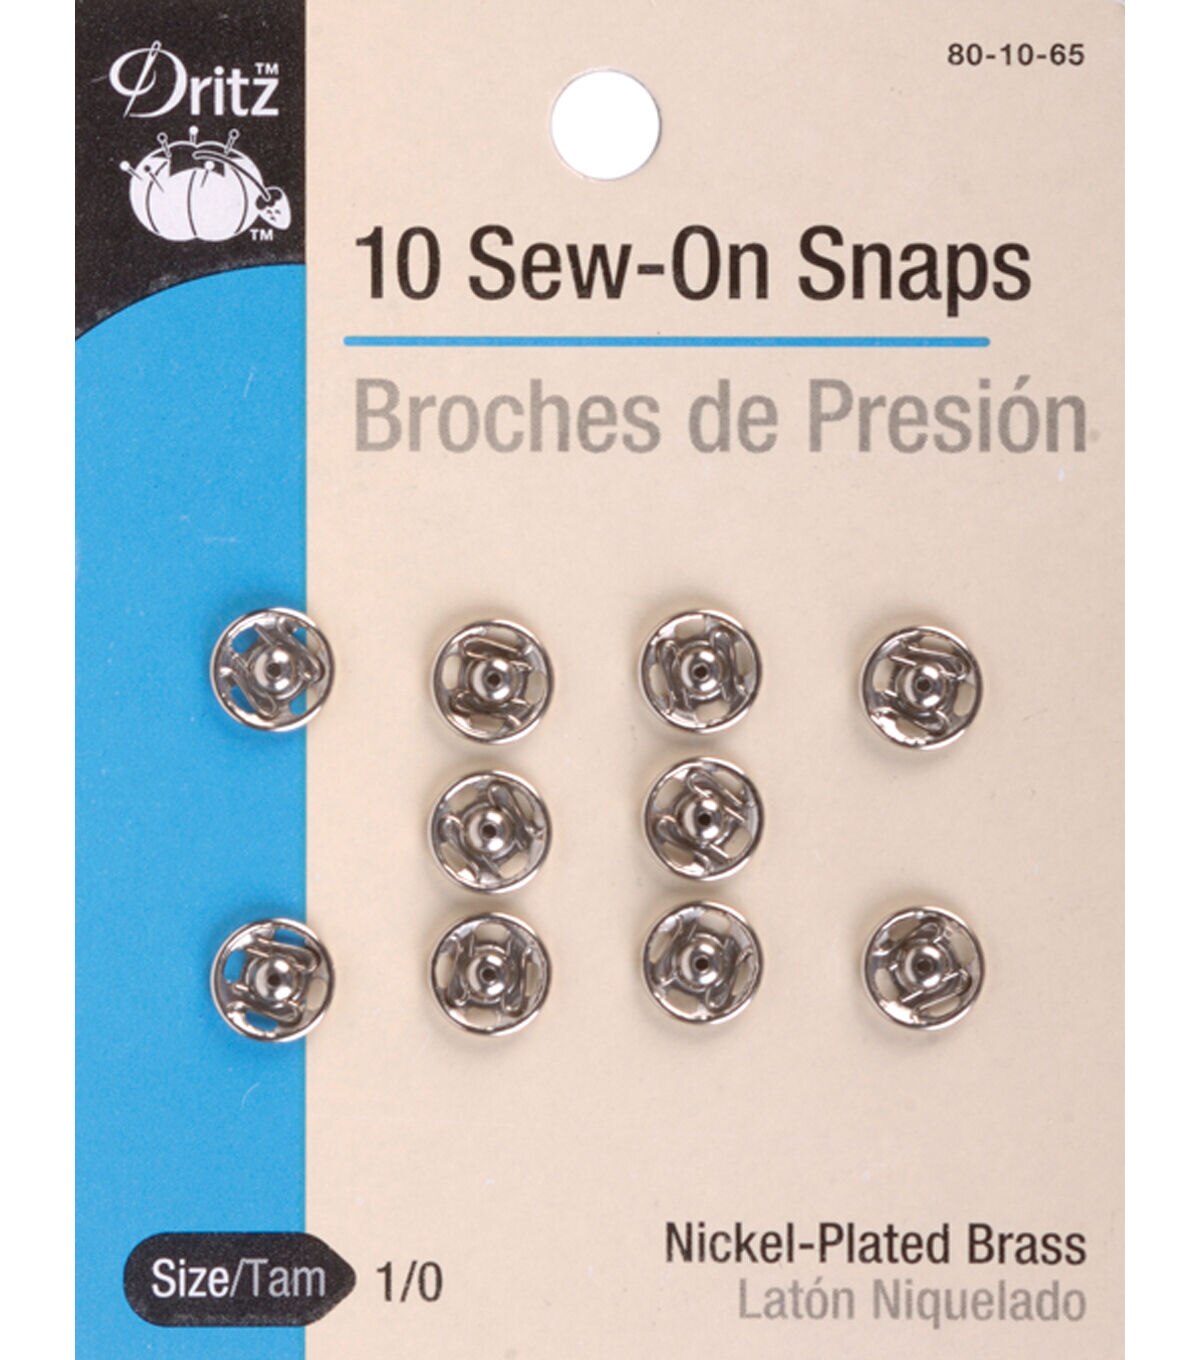 Dritz Sew-On Snaps Clear QTY-3 12 Ct. 